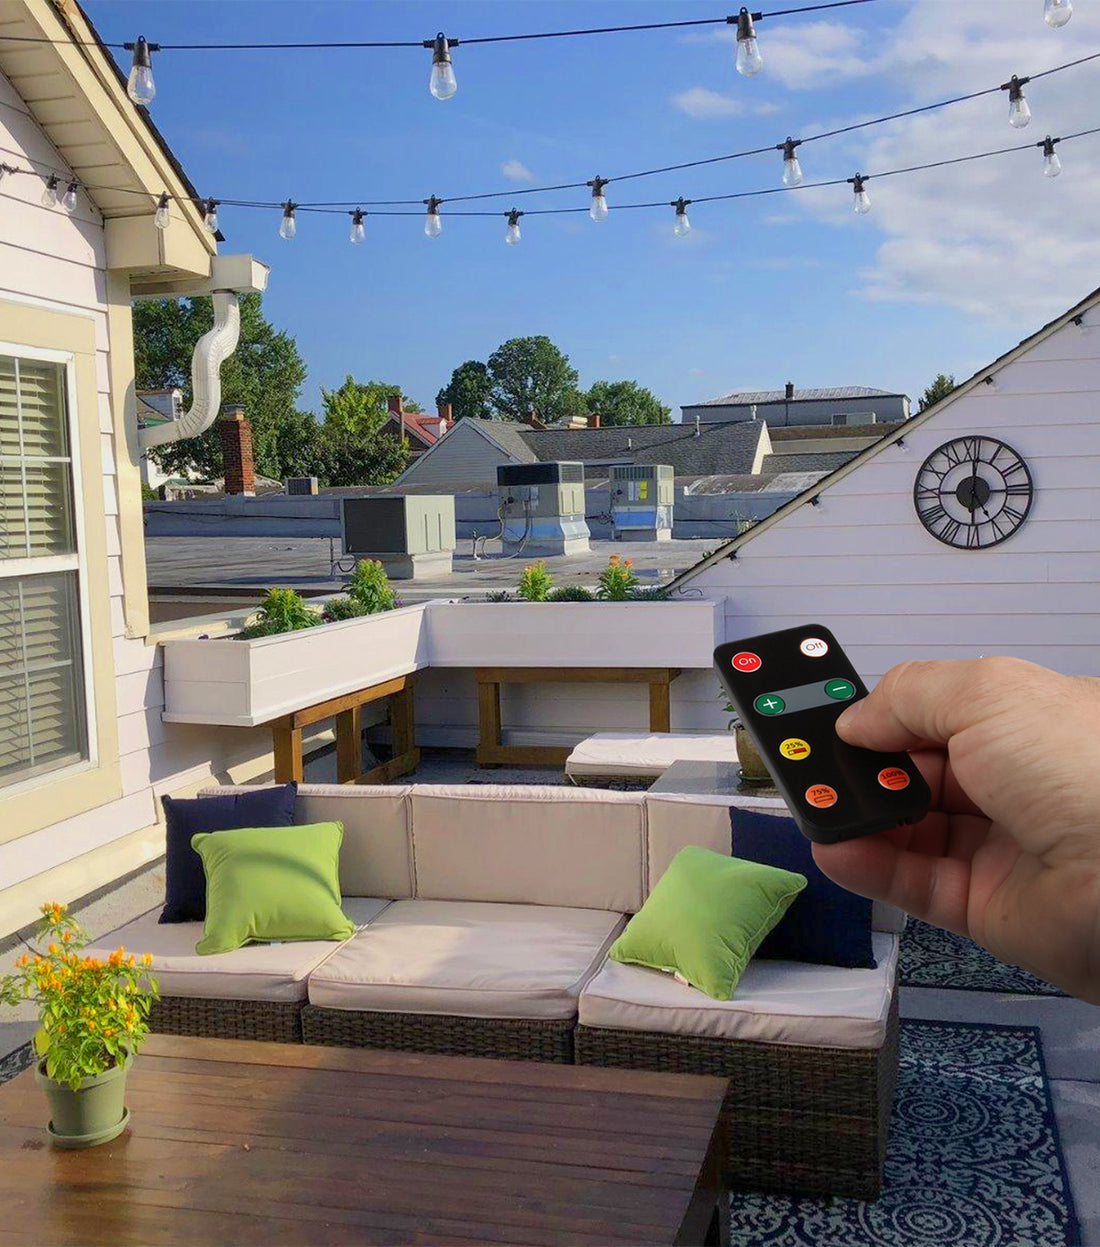 Brightech Dimmer with Remote for Our Ambience Pro LED String Lights - Commercial Grade Dimmer Rated at 150 Watts - Create a Welcoming Atmosphere with Multiple Levels of Brightness